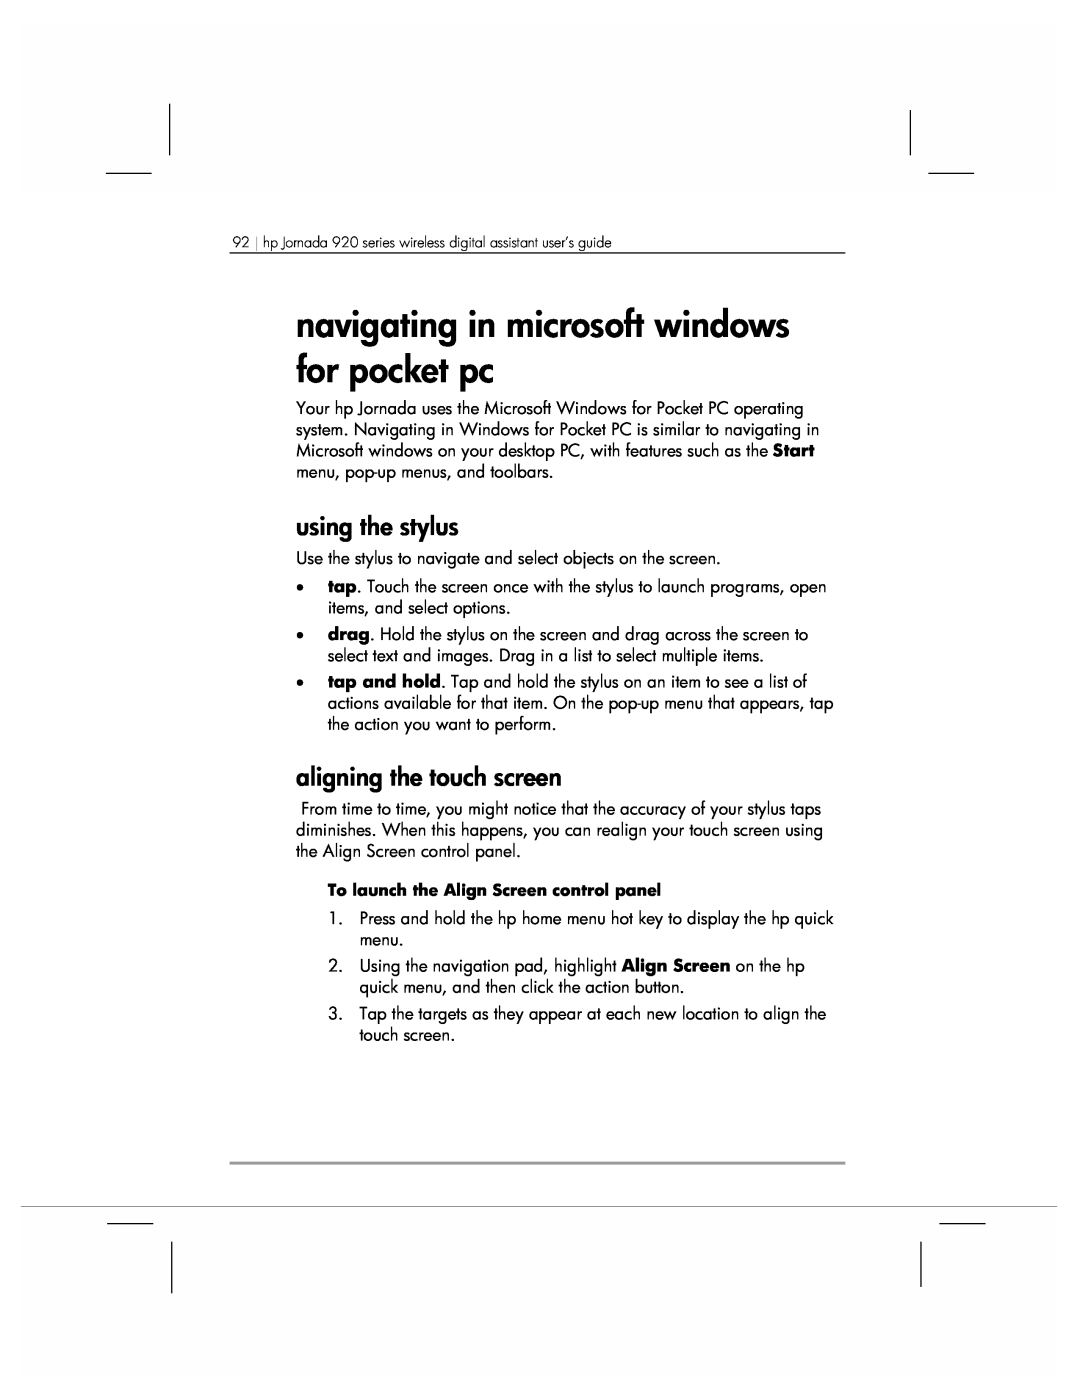 HP 920 manual navigating in microsoft windows for pocket pc, using the stylus, aligning the touch screen 